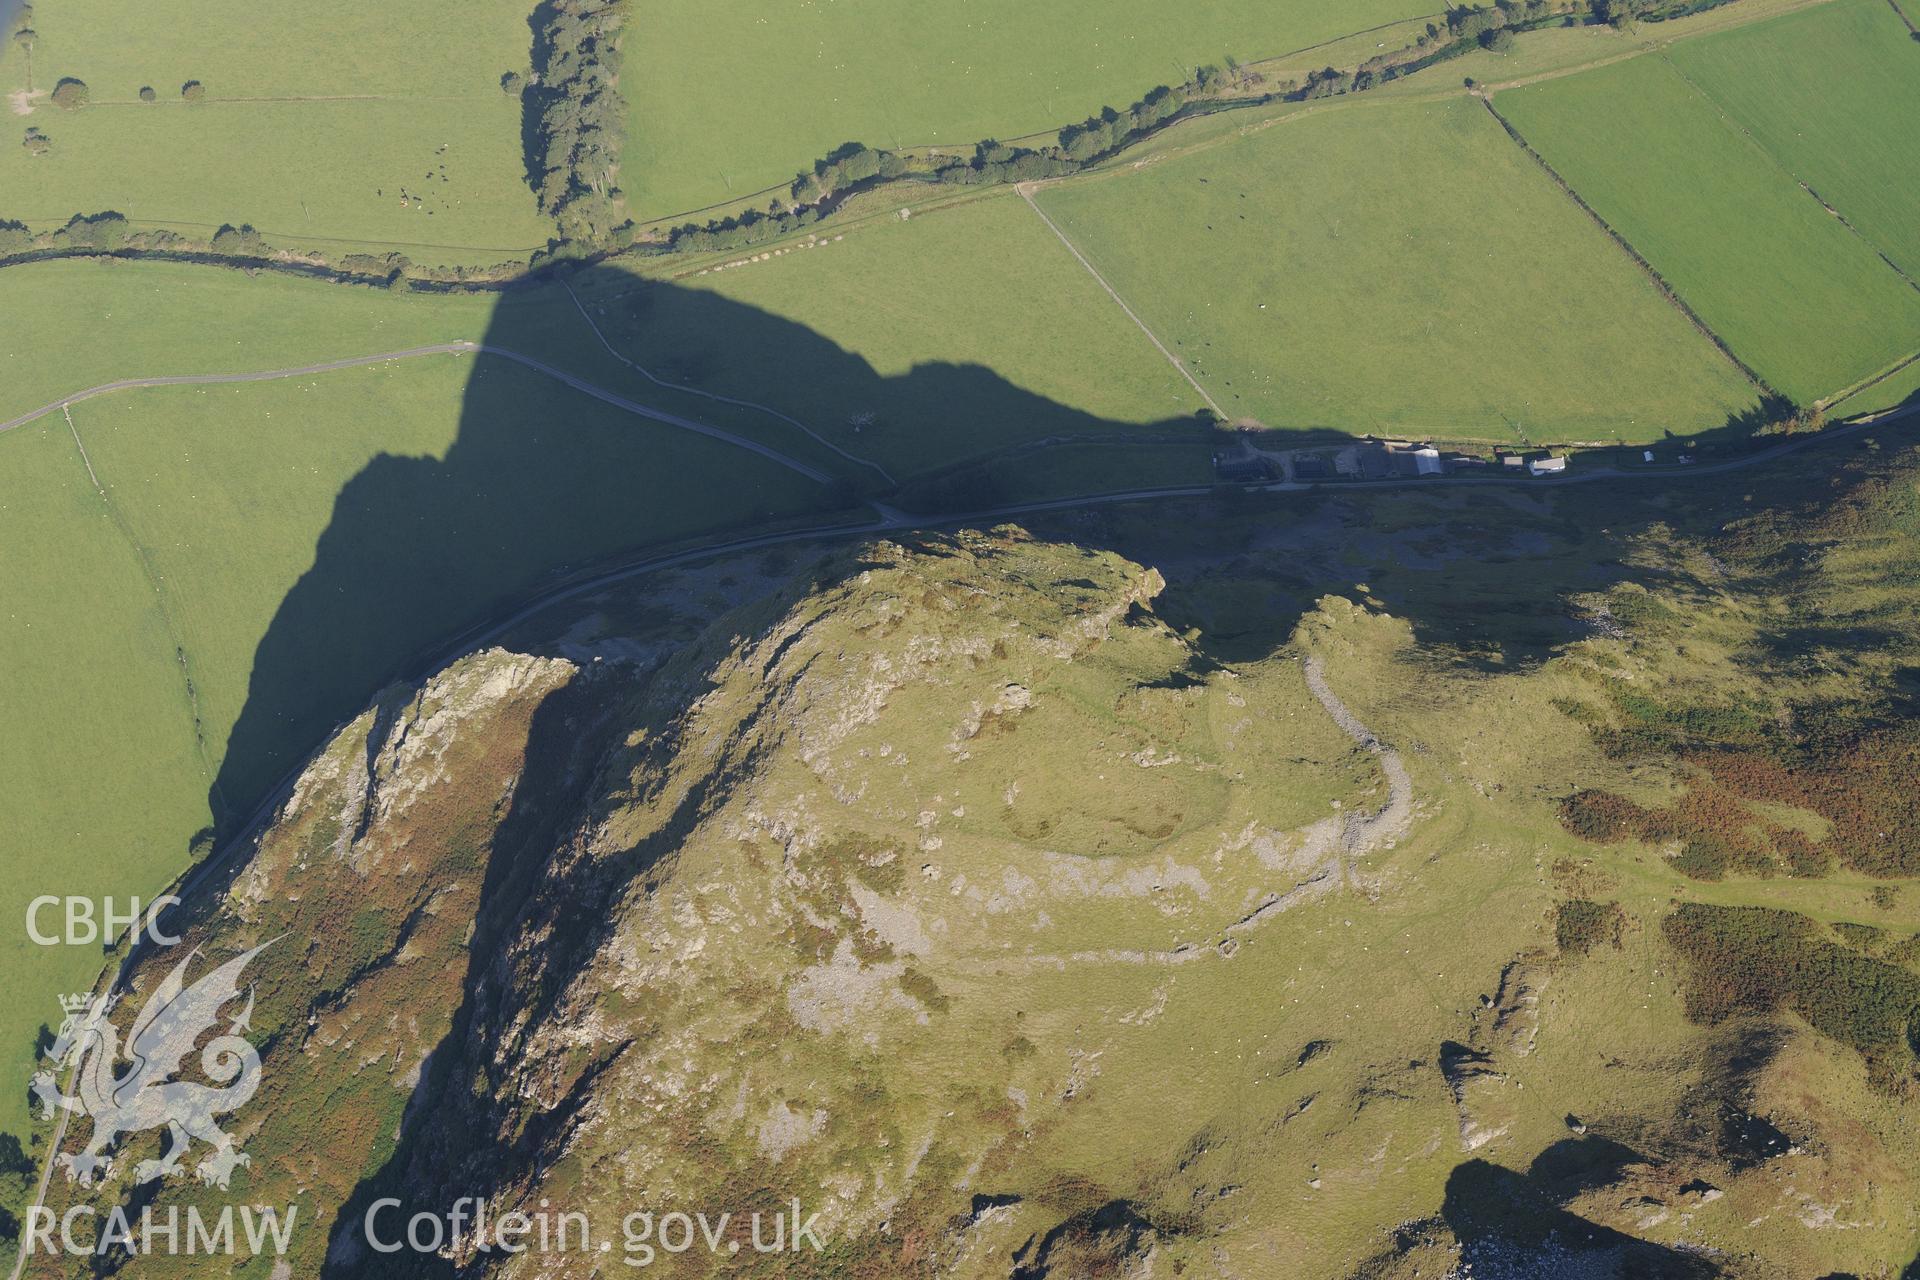 Hillfort on Bird's Rock, near Abergynolwyn. Oblique aerial photograph taken during the Royal Commission's programme of archaeological aerial reconnaissance by Toby Driver on 2nd October 2015.